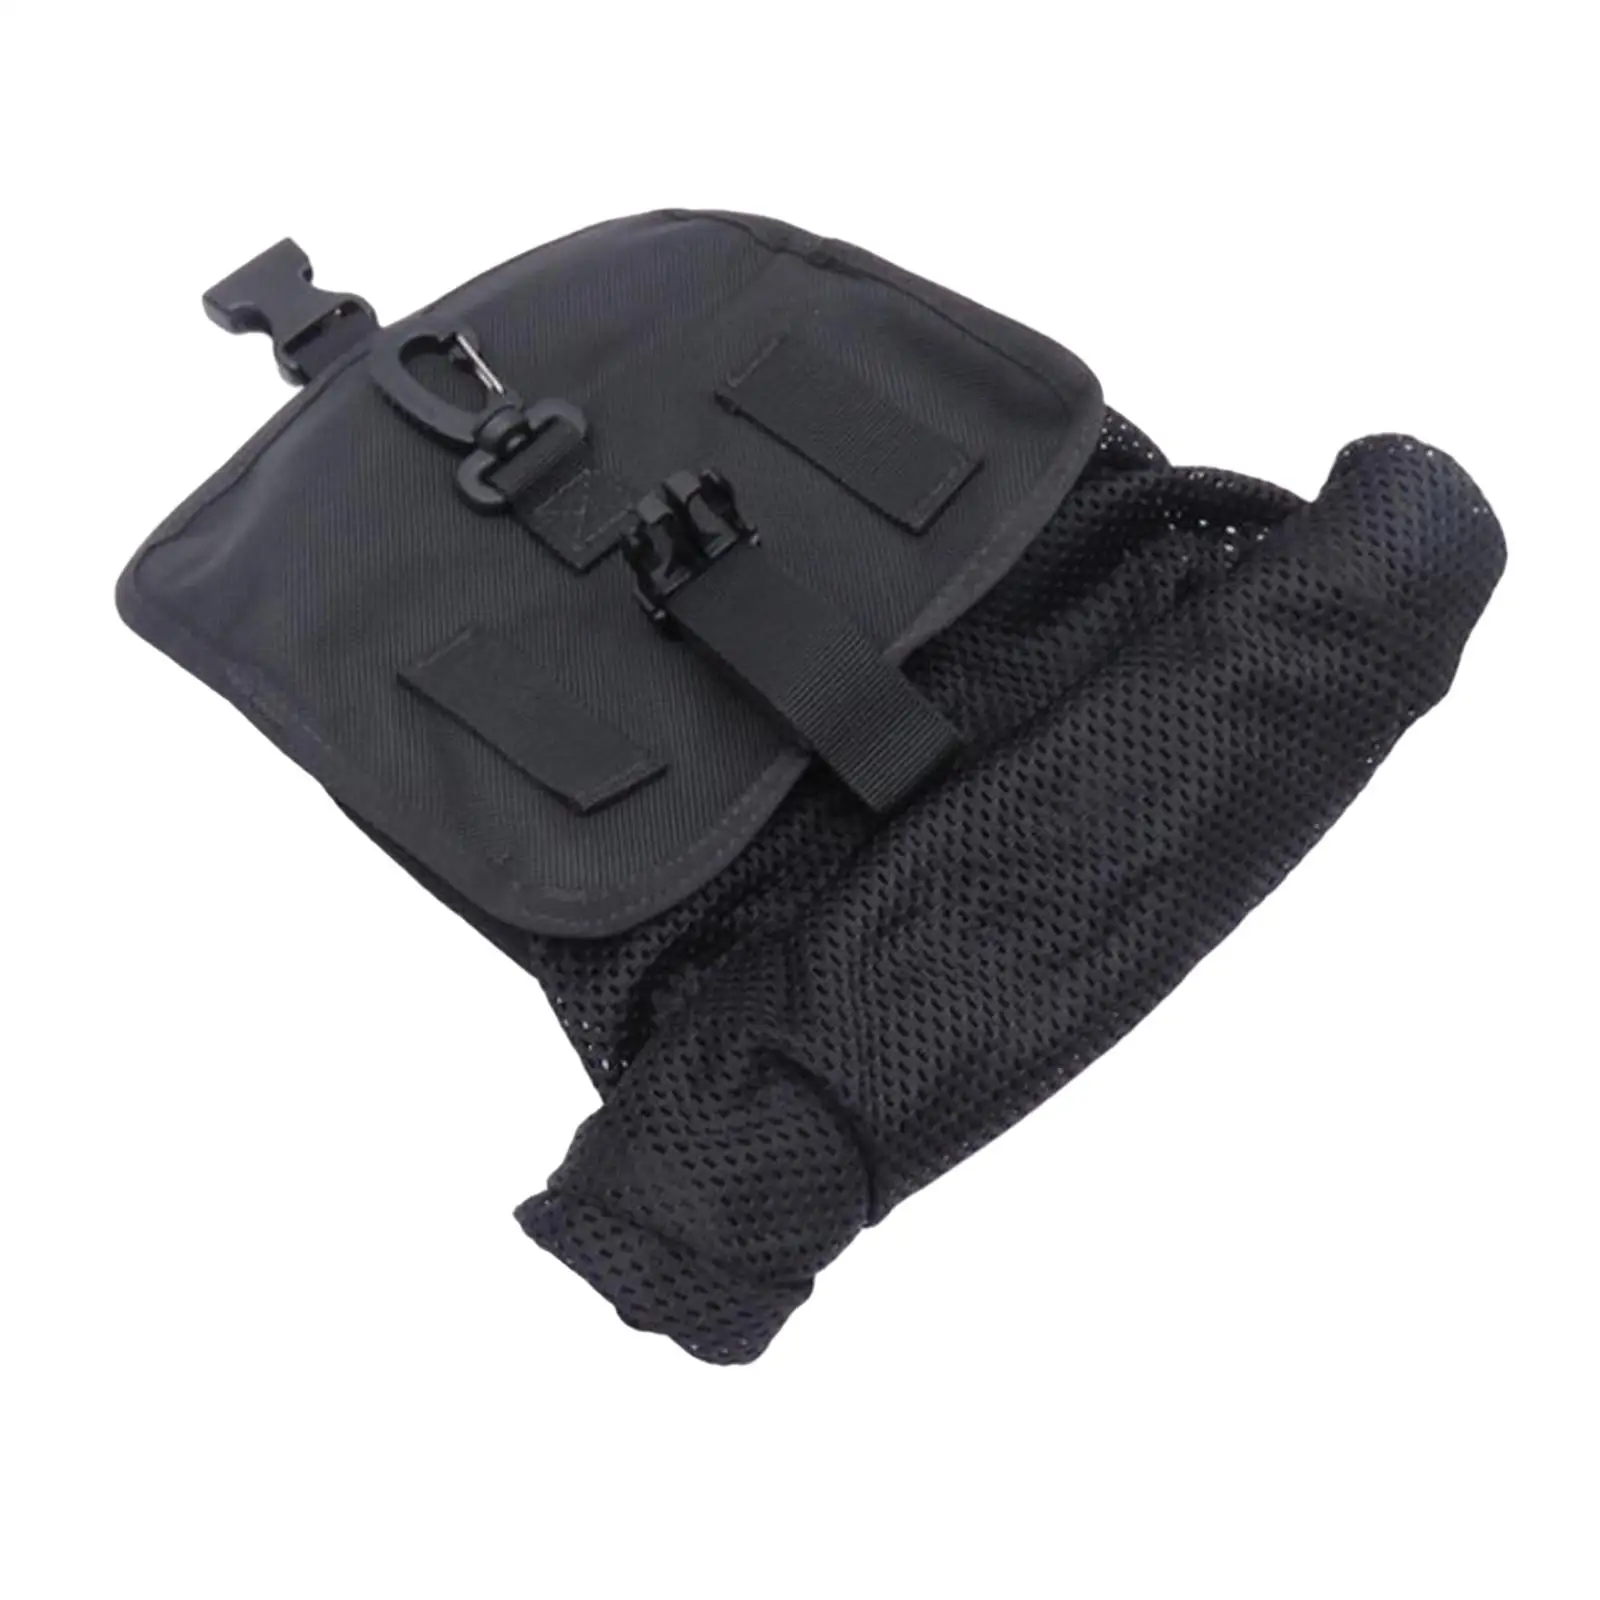 Scuba Diving Mesh Pouch Storage Holder Water Sports Organizer BCD Dive Equipment Snorkelling Bag for Underwater Compass Keys 